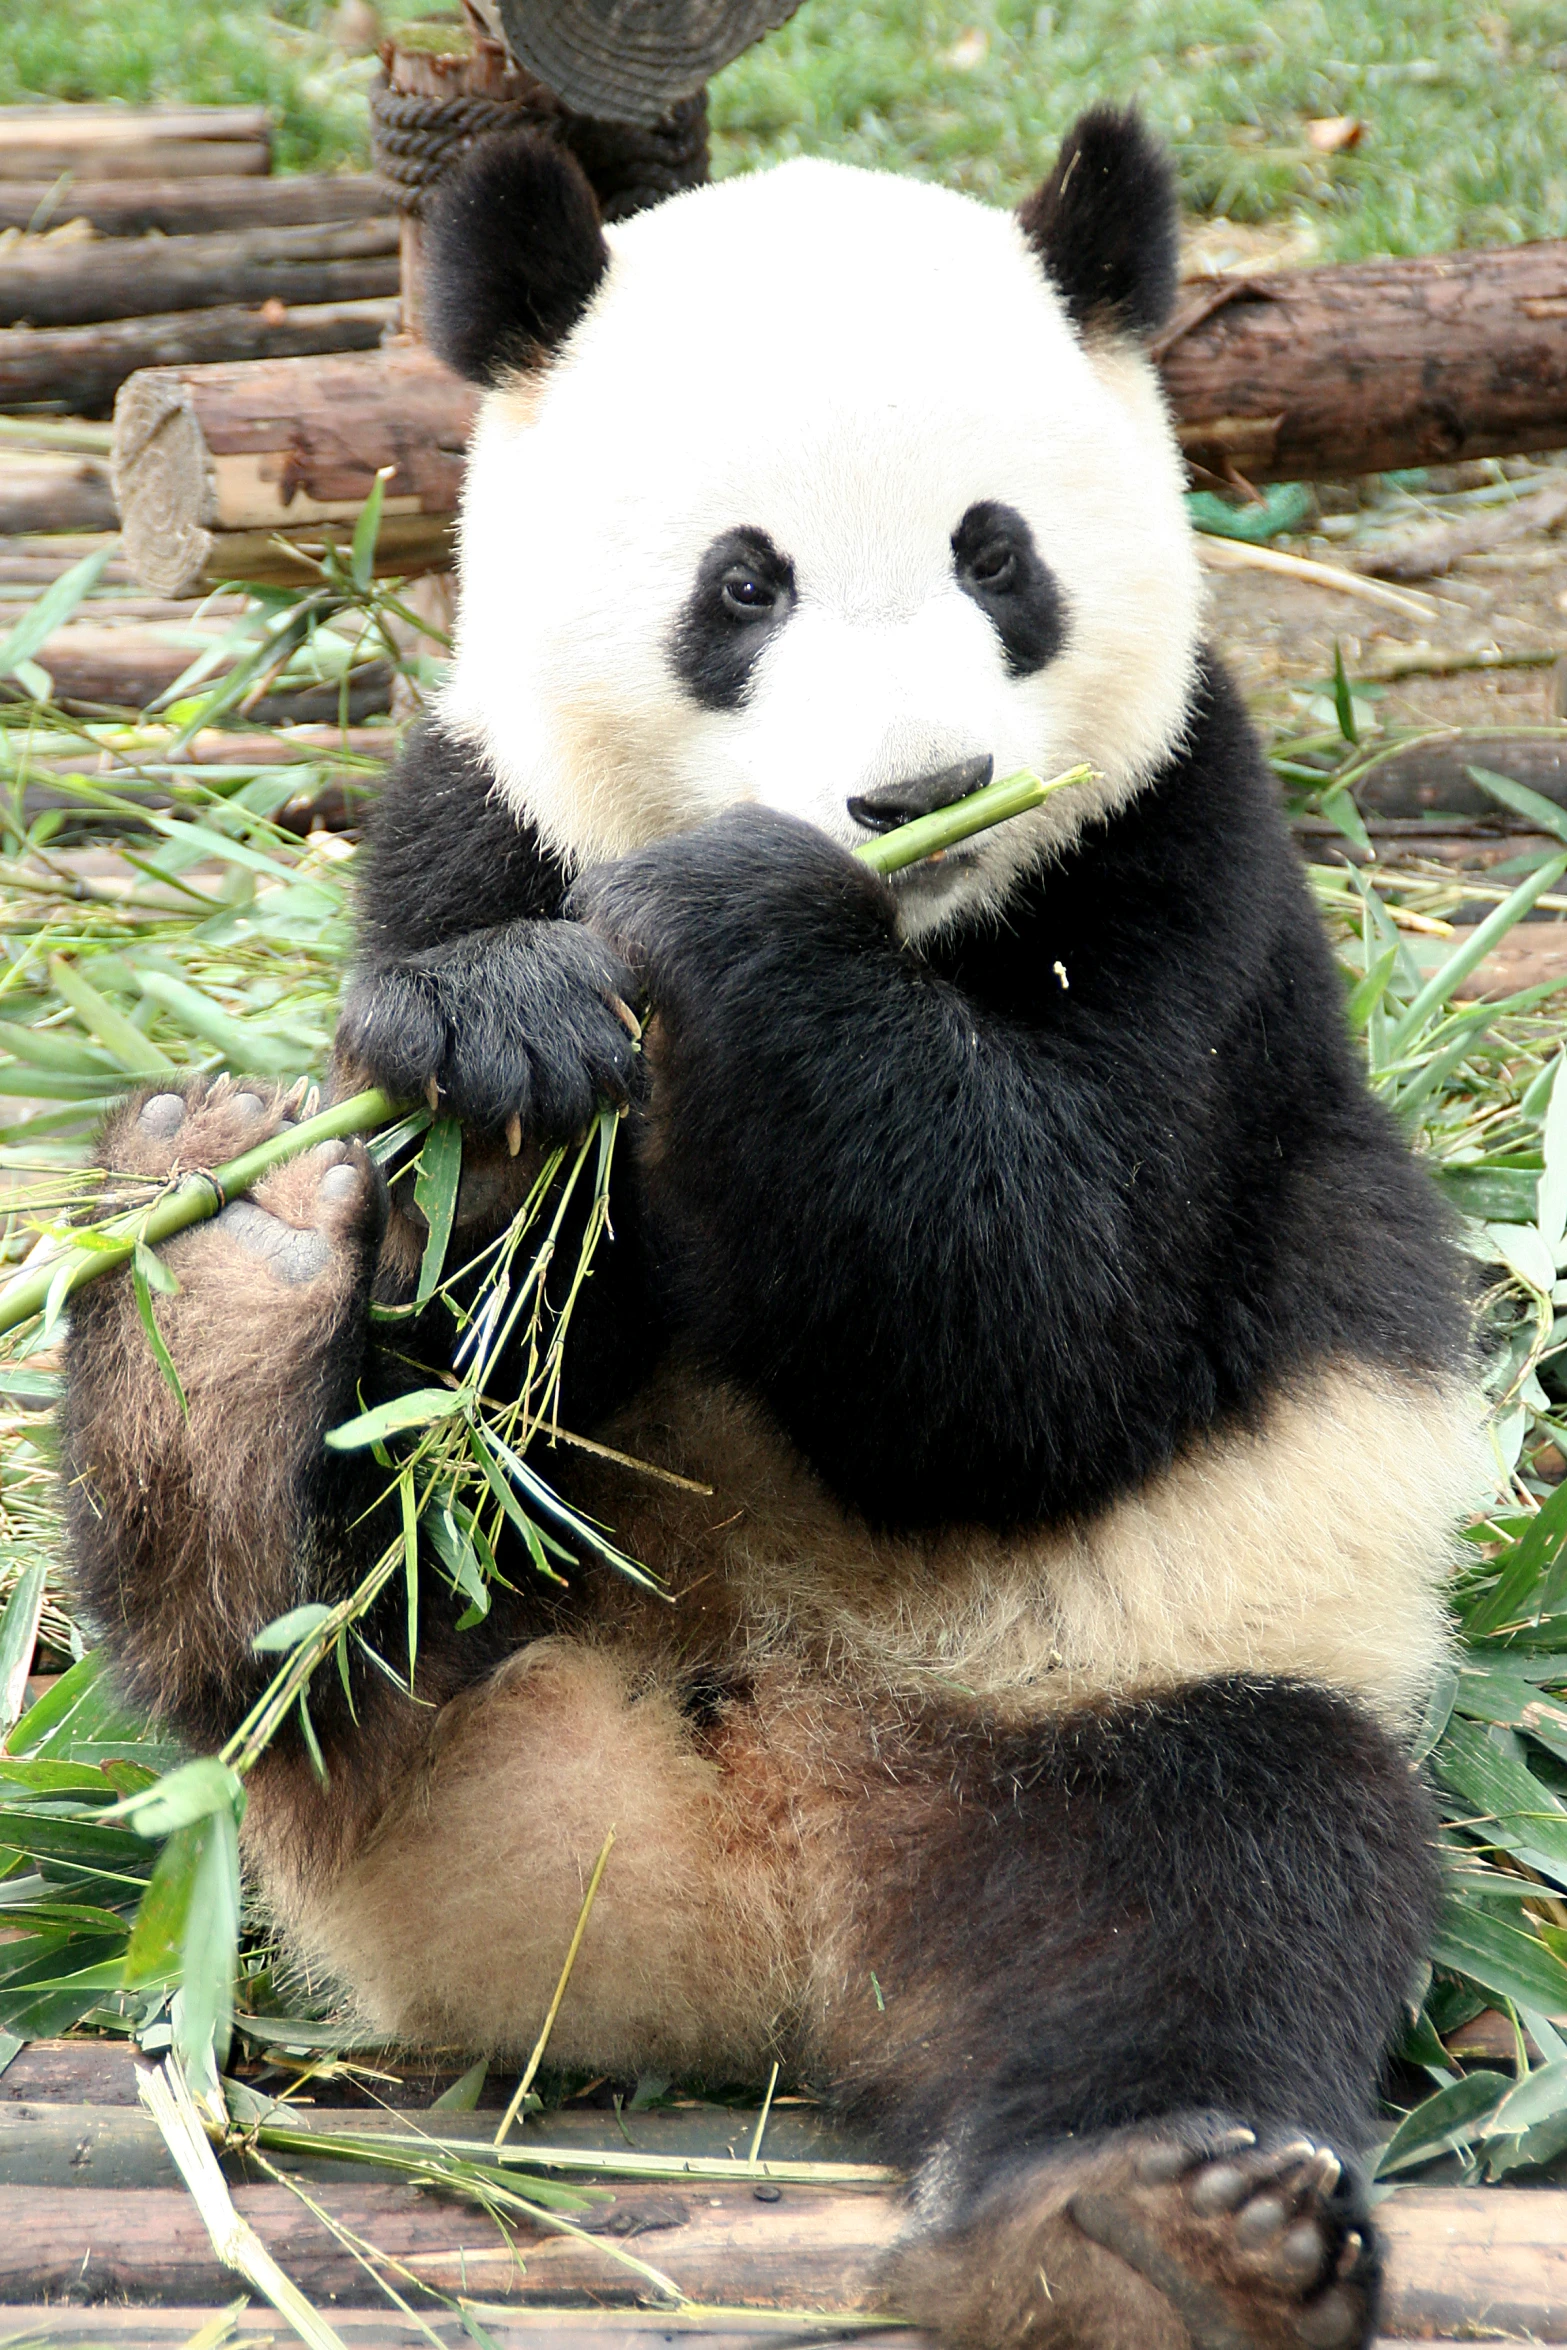 a panda sitting down eating bamboo from its hands